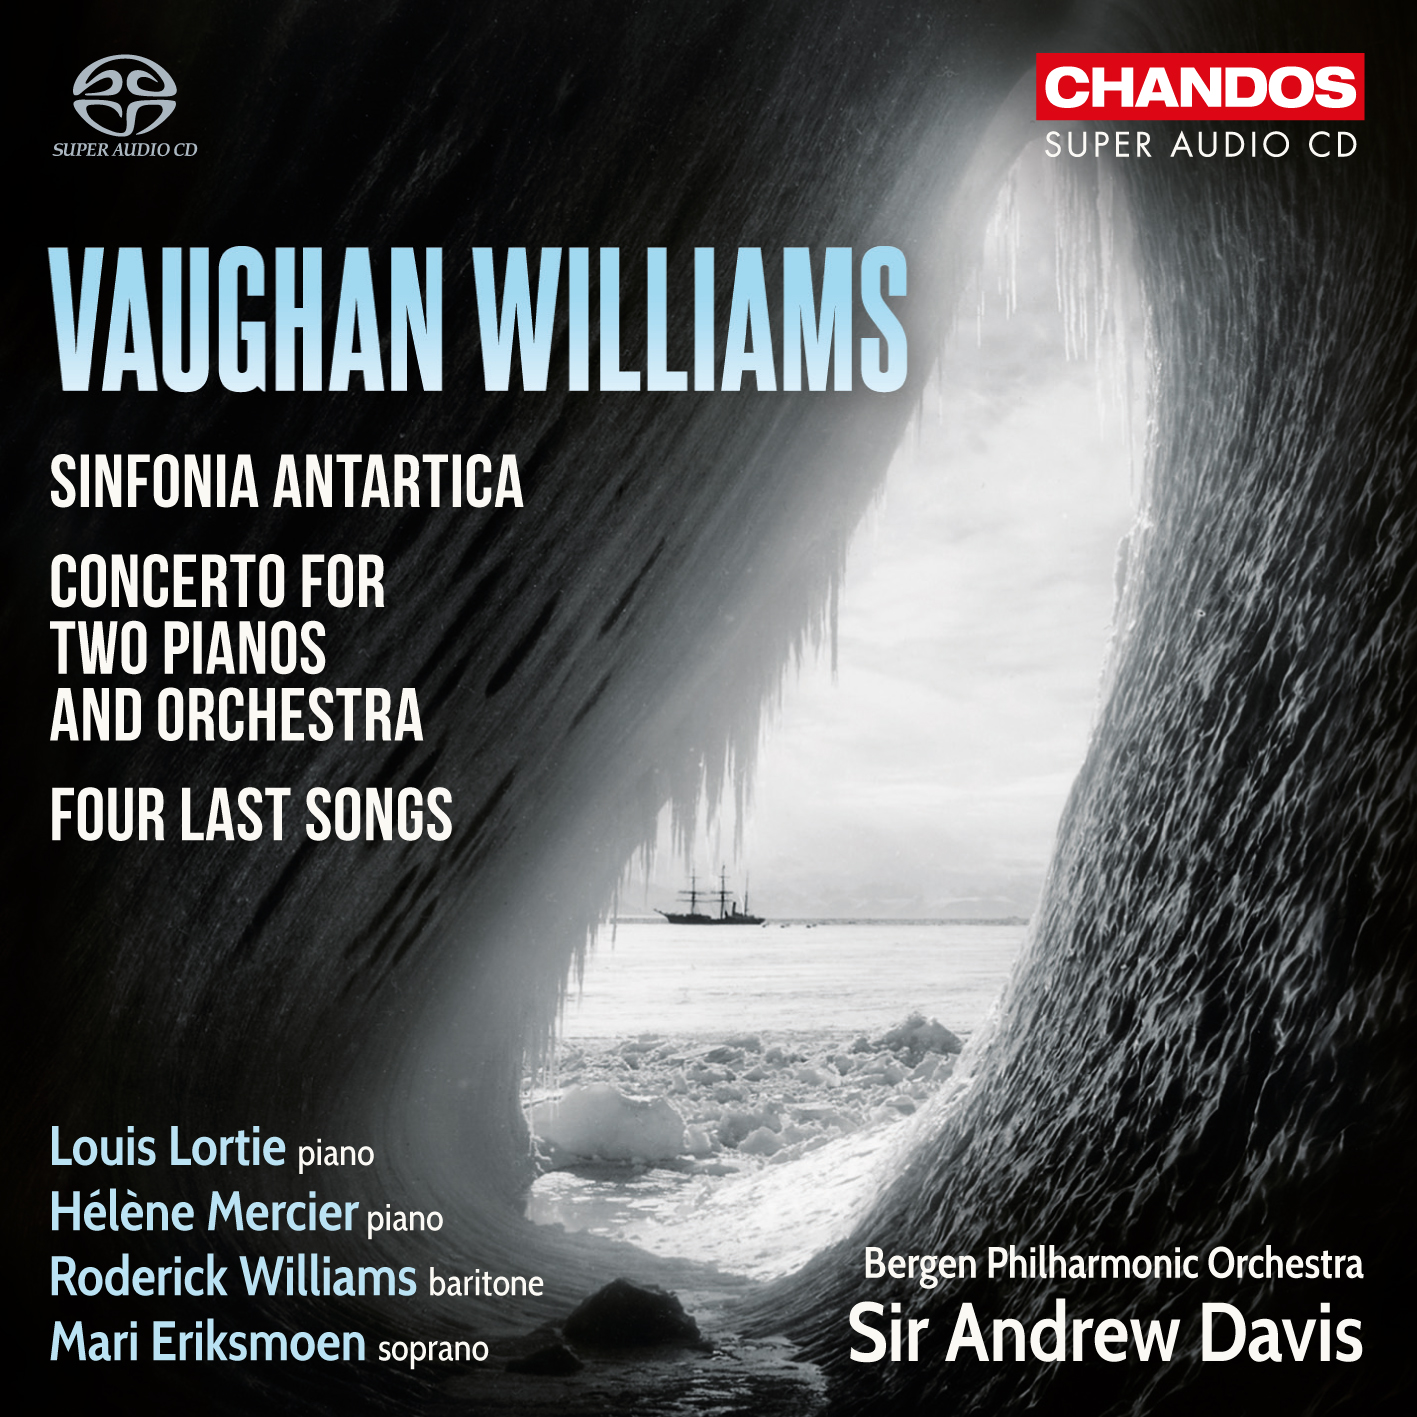 Bergen Philharmonic Orchestra, Sir Andrew Davis - Vaughan Williams: Sinfonia Antartica, Four Last Songs & Concerto for Two Pianos & Orchestra (2017) [FLAC 24bit/88,2kHz]